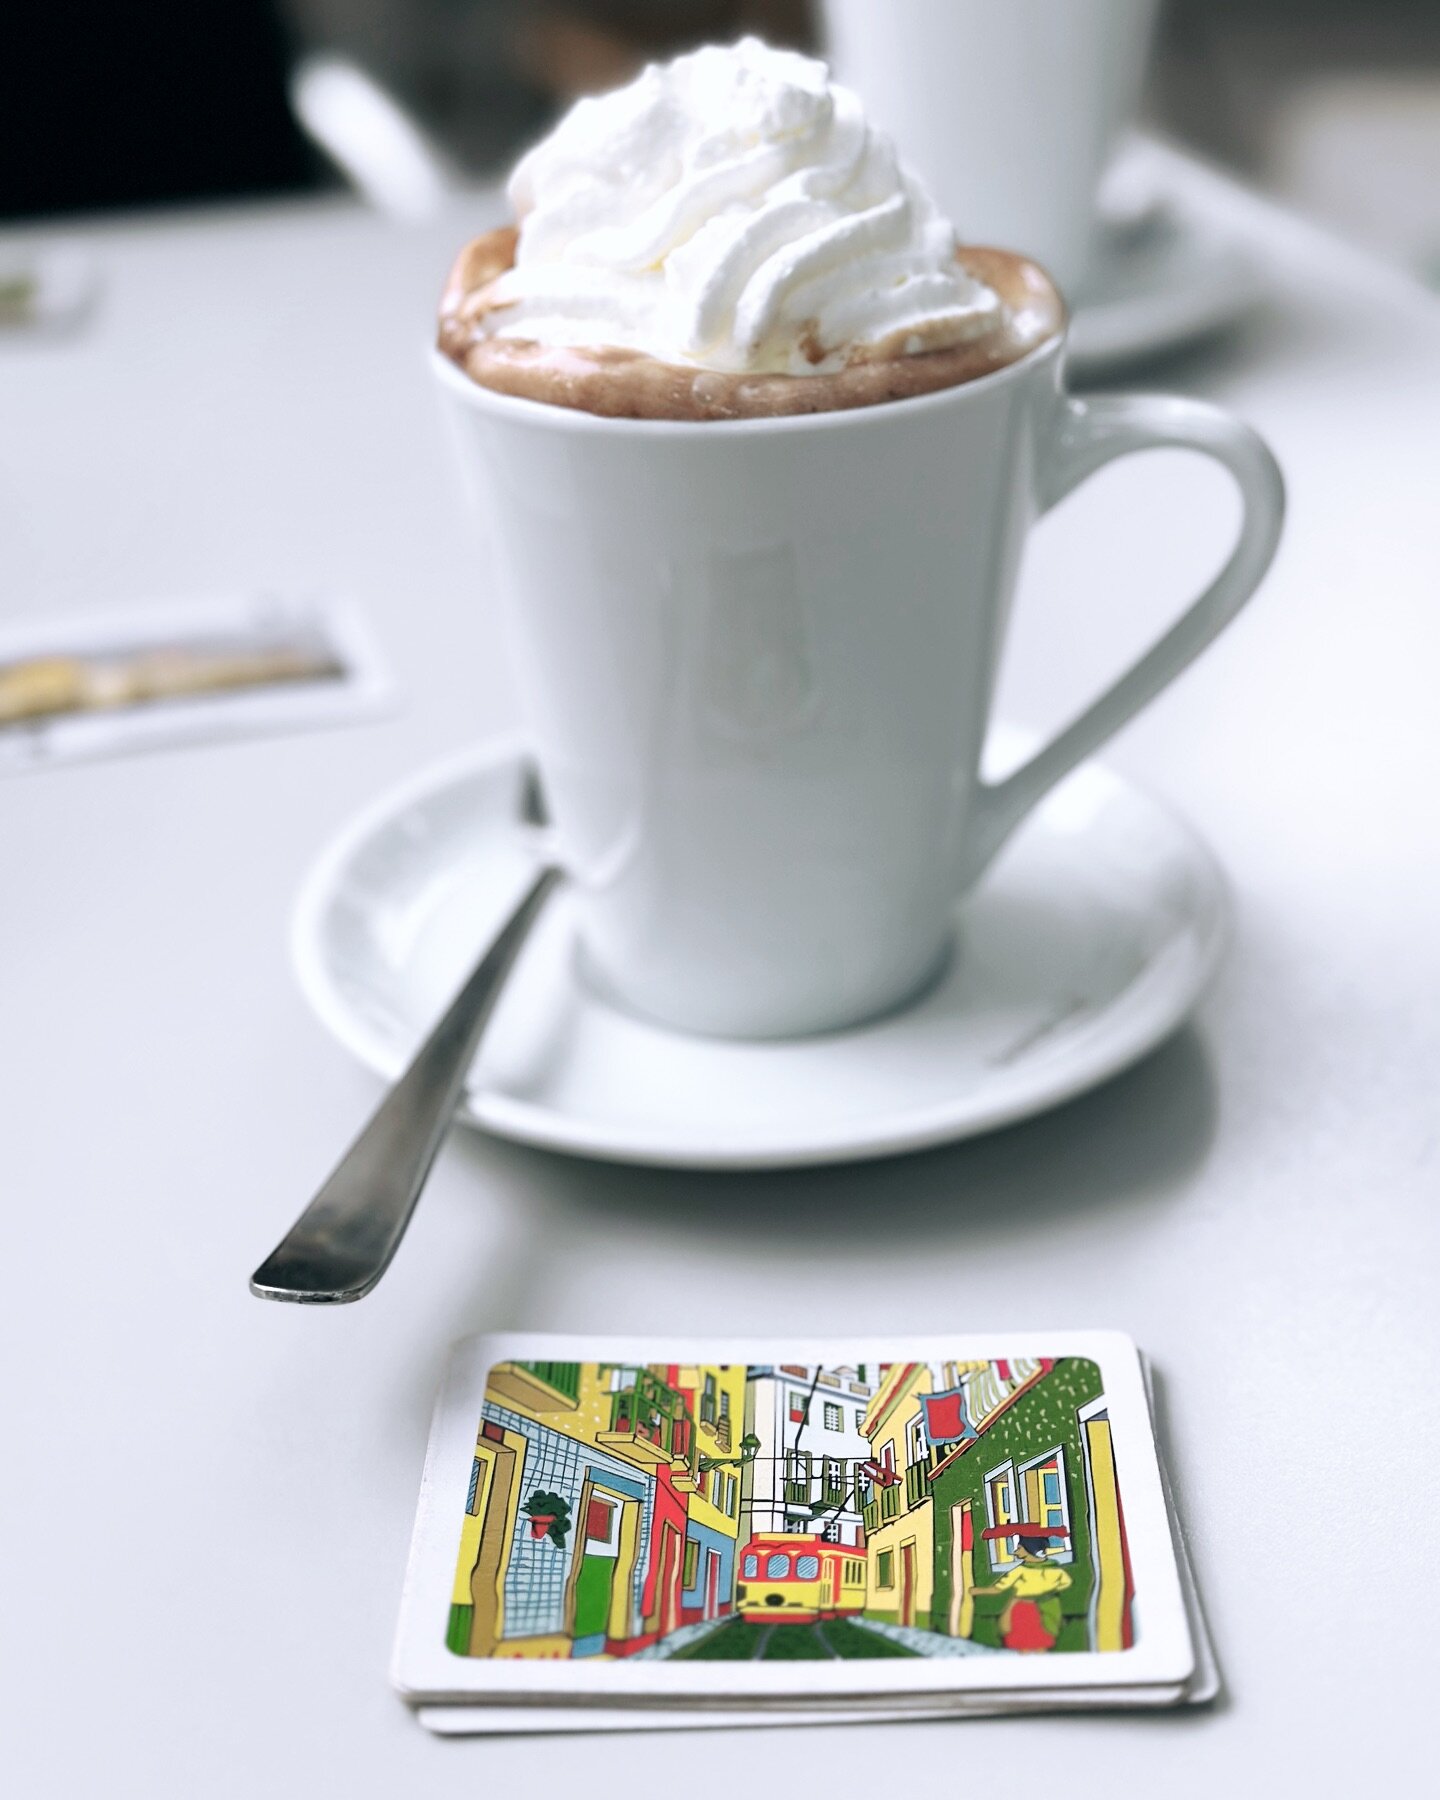 Sippin&rsquo; on cocoa, soaking in the chill vibes at this cute outdoor spot. Cards, laughter, and a splash of Lisbon&rsquo;s colors &ndash; because holidays are all about slowing down and enjoying the good stuff. Cheers to cozy moments! ☕🃏 #chillda